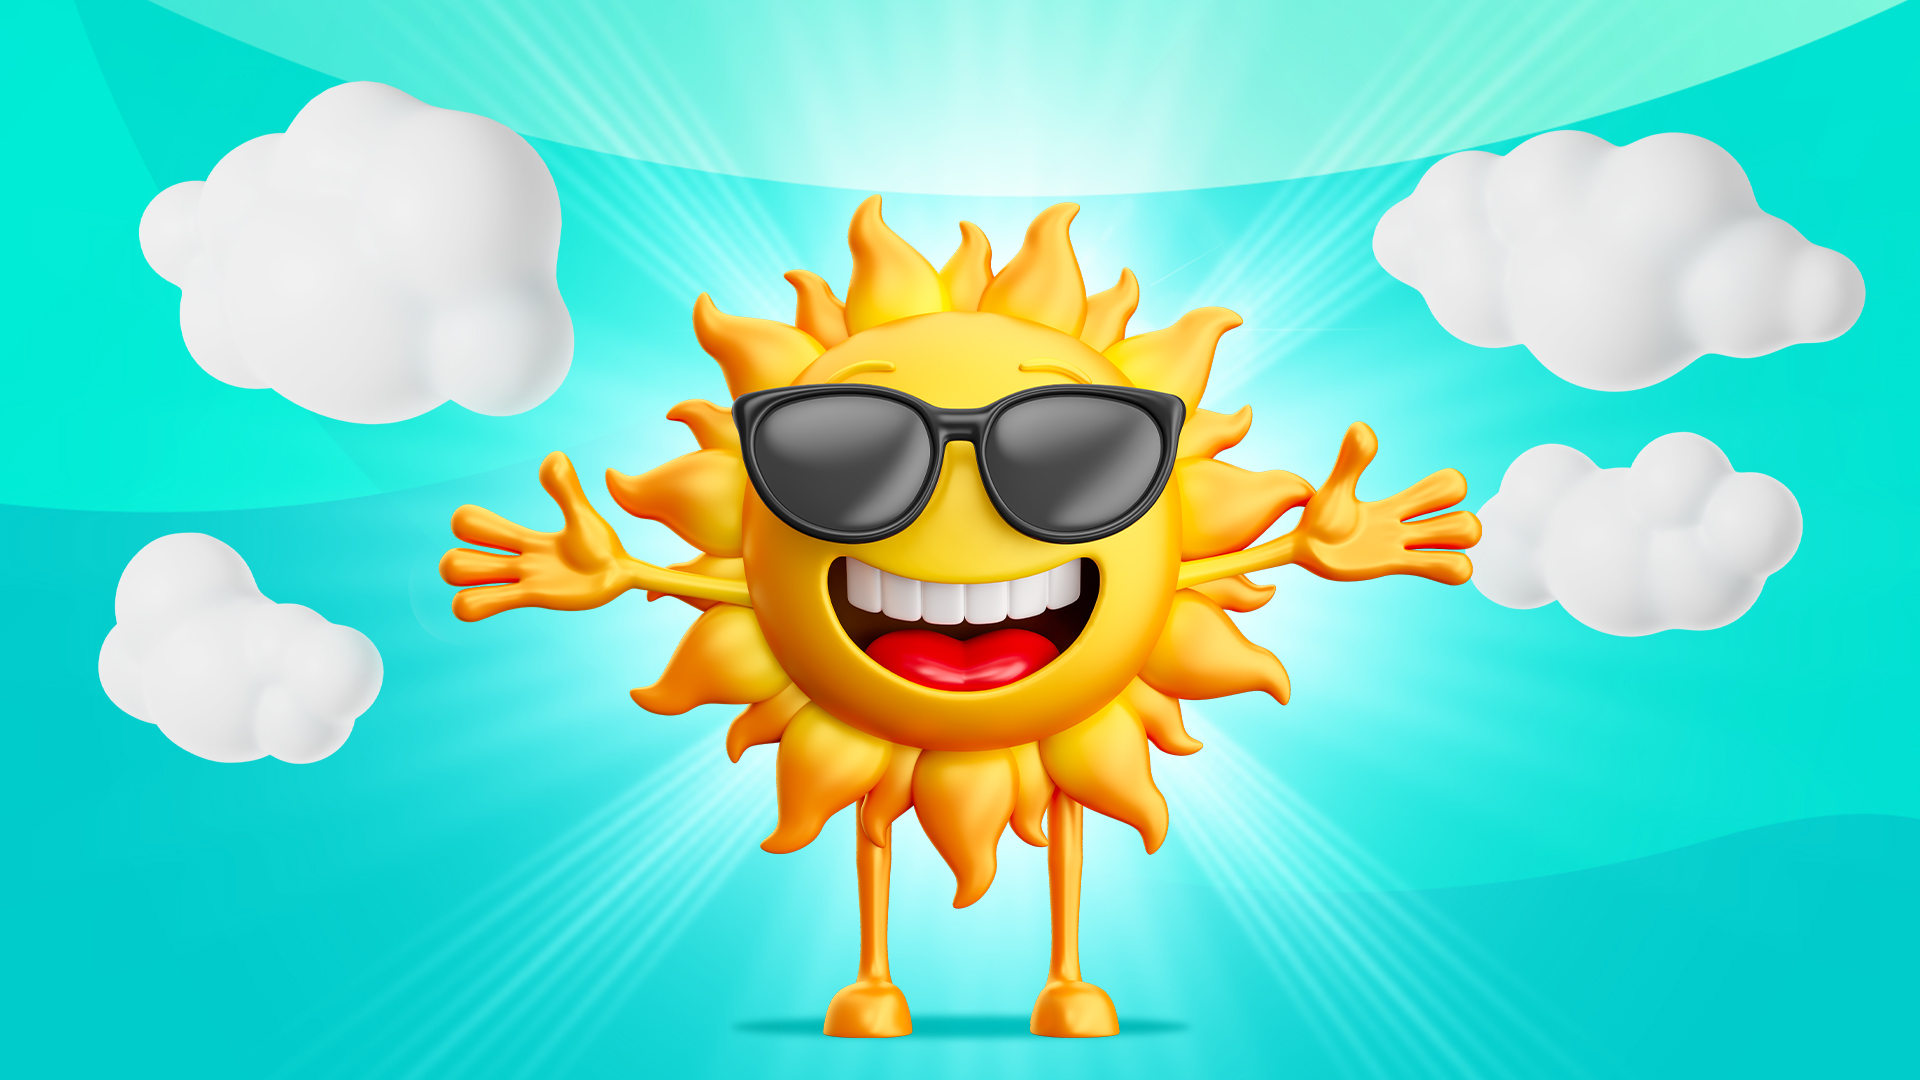 A big smiling sun wearing sunglasses is in the center of a bright blue sky with white puffy clouds.